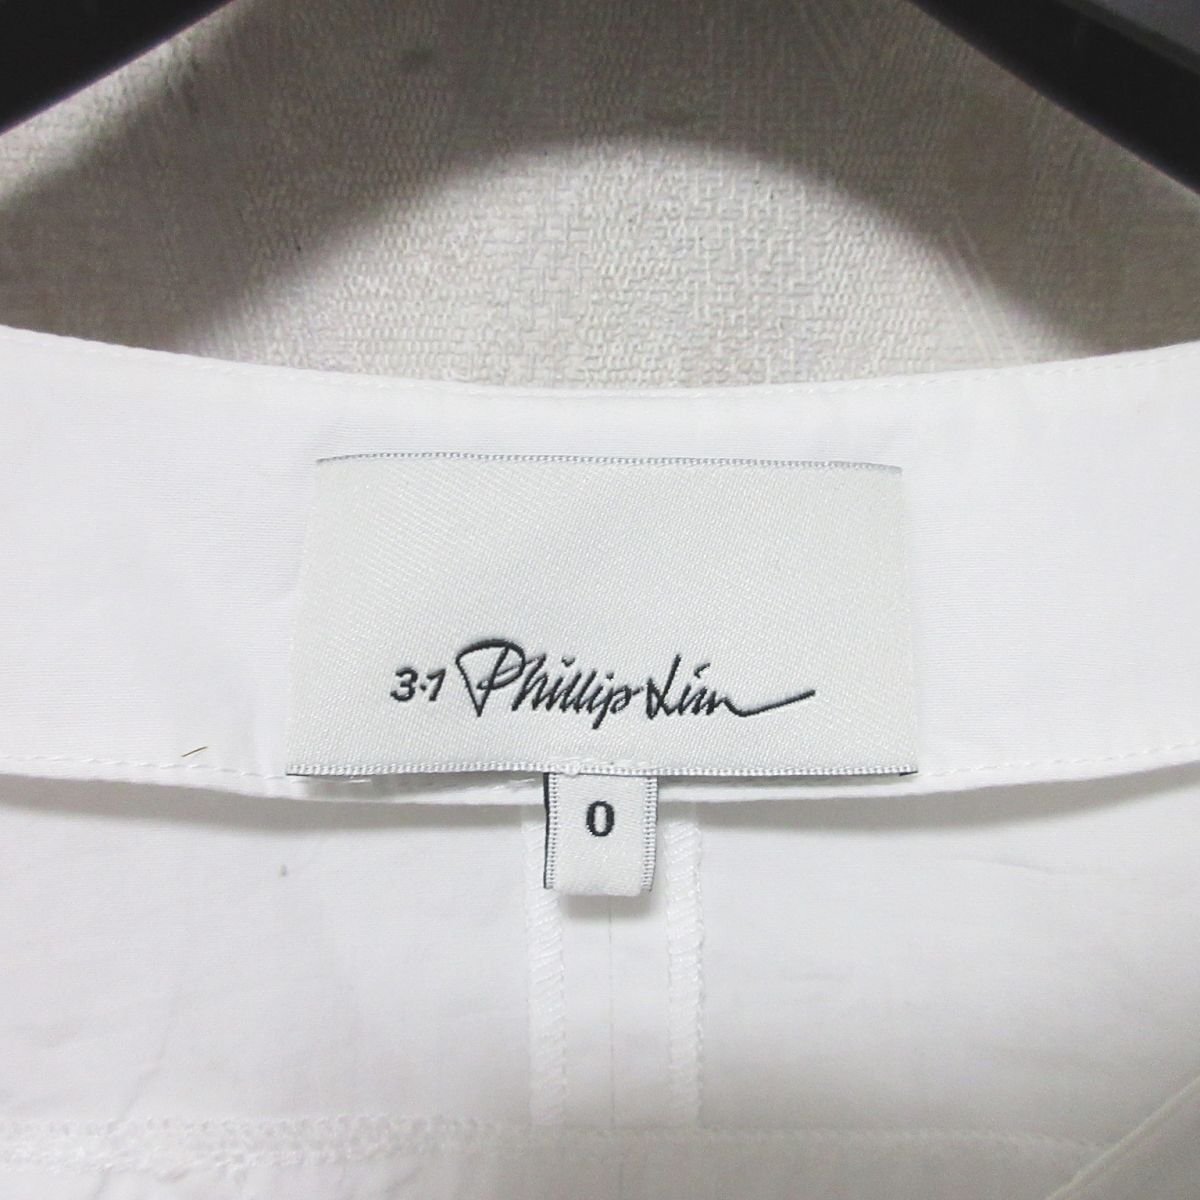  beautiful goods 20SS 3.1 Phillip lim 3.1 Philip rim long sleeve boat neck pull over cut and sewn blouse 0 white *